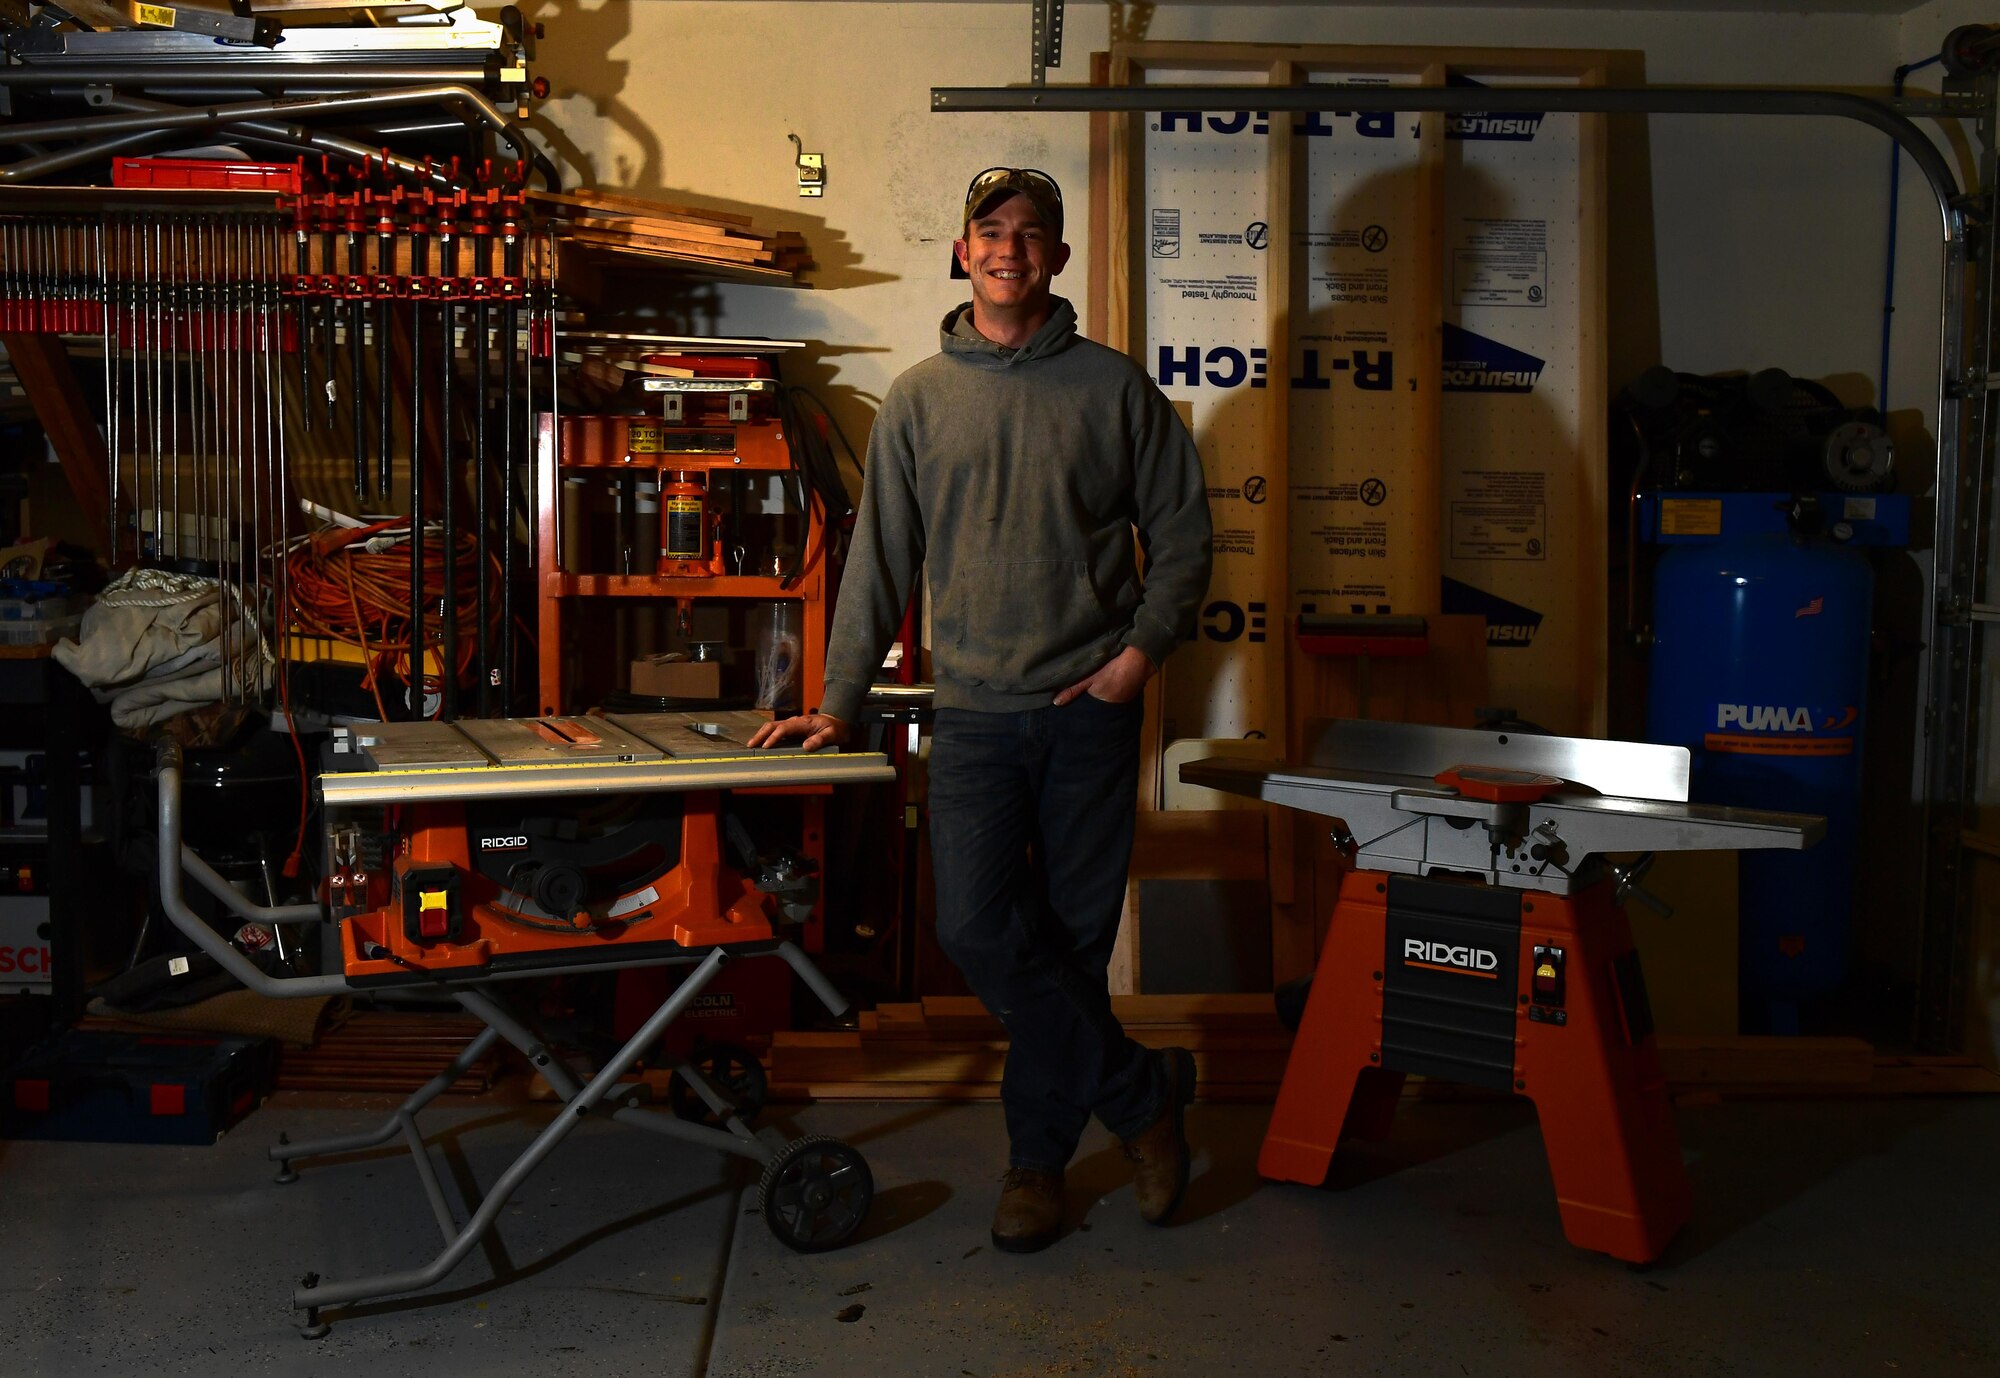 Tech. Sgt. Nicholas, 432nd Maintenance Group Quality Assurance inspector, poses for a photo Dec. 18, 2016, at his home in Las Vegas, Nev. Nicholas shares his woodworking passion by making award plaques and shadow boxes for members of Creech Air Force Base. (U.S. Air Force photo by Senior Airman Christian Clausen/Released)